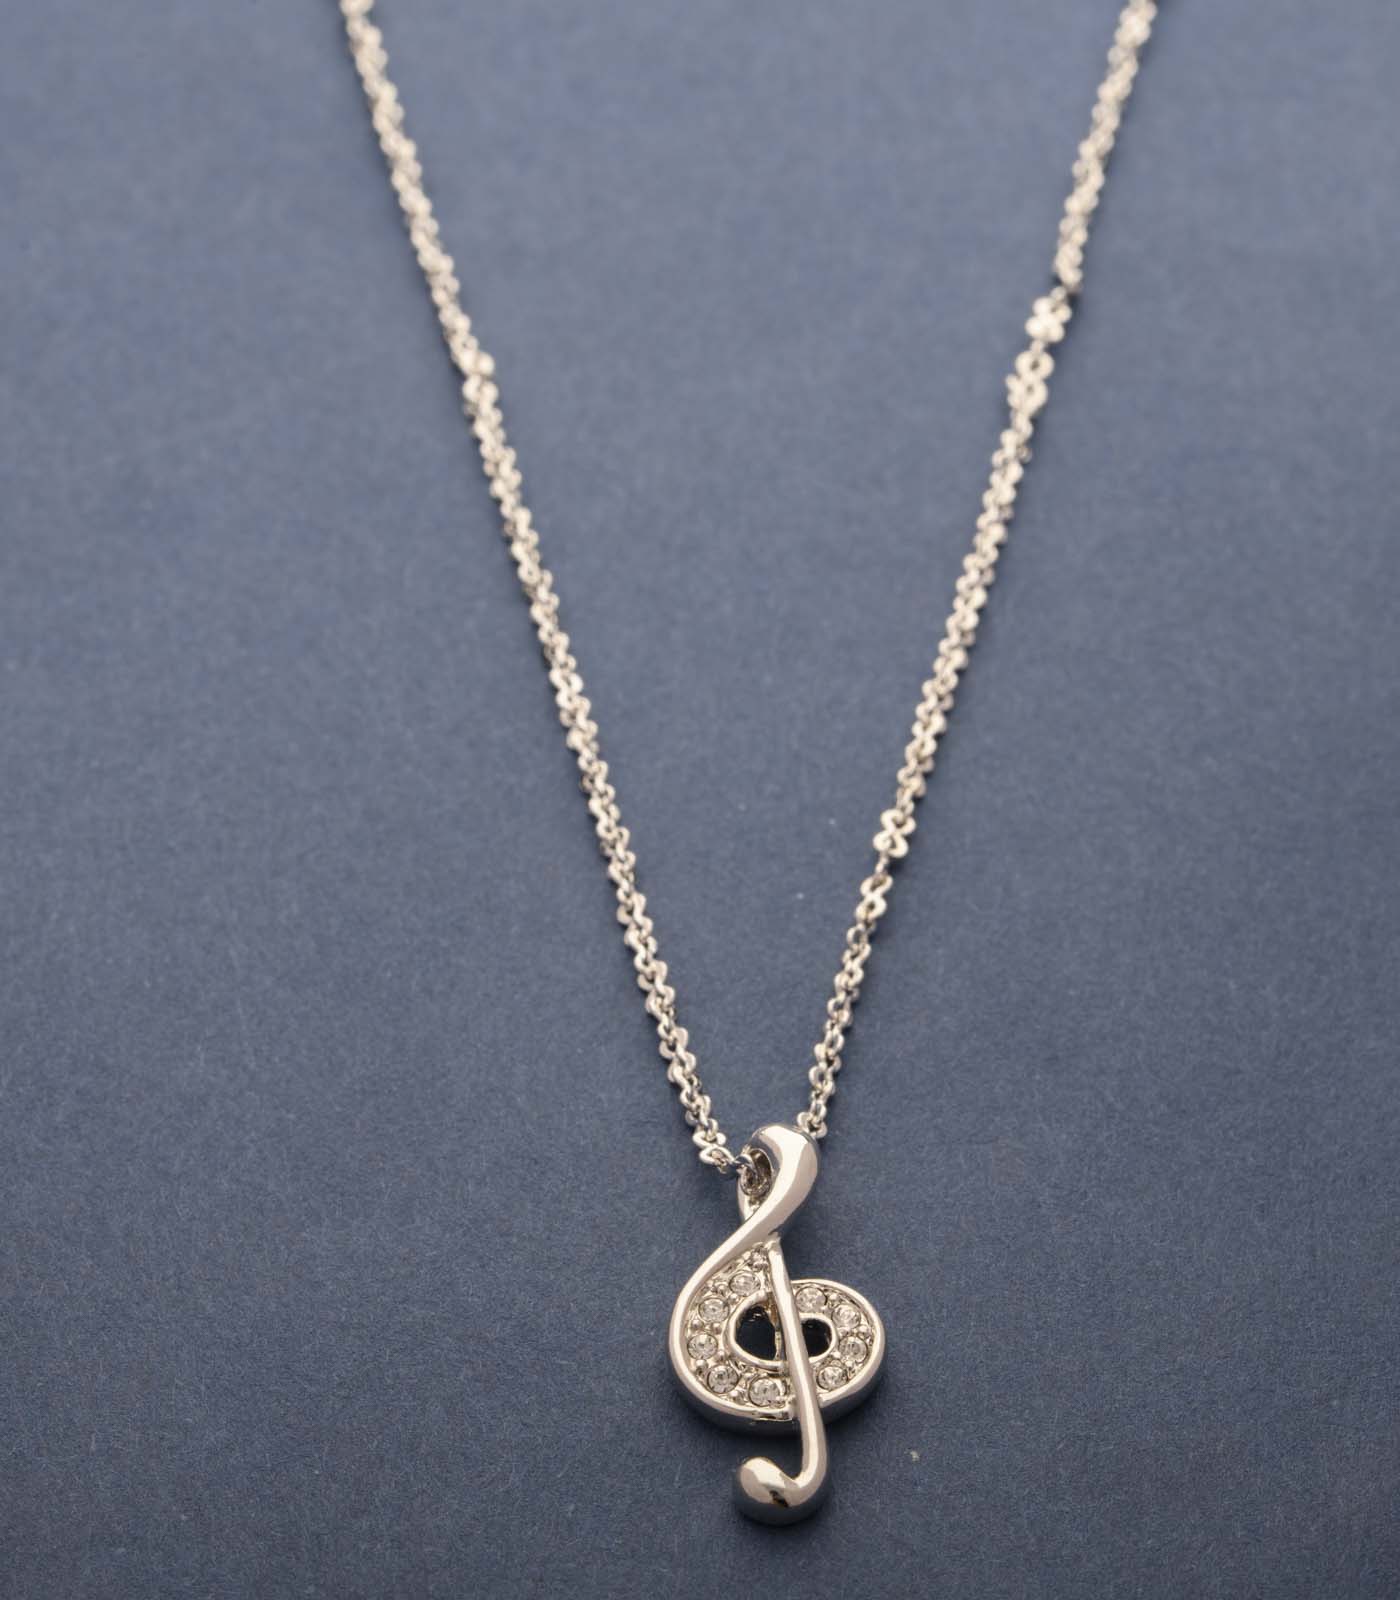 Fancy Silver Pendant Of Musical Notes Necklace (Brass)